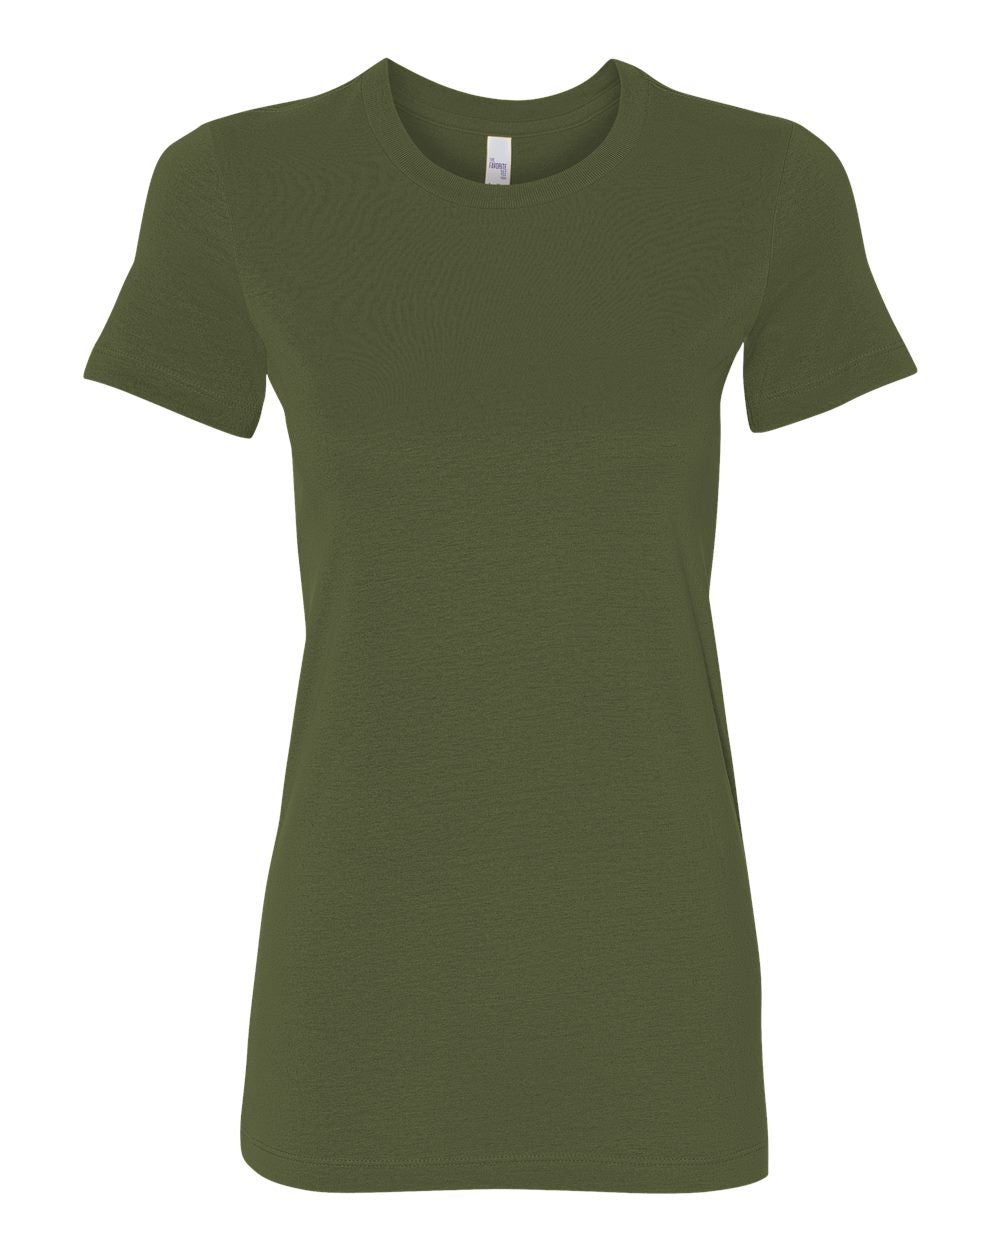 bella+canvas womens tee olive green